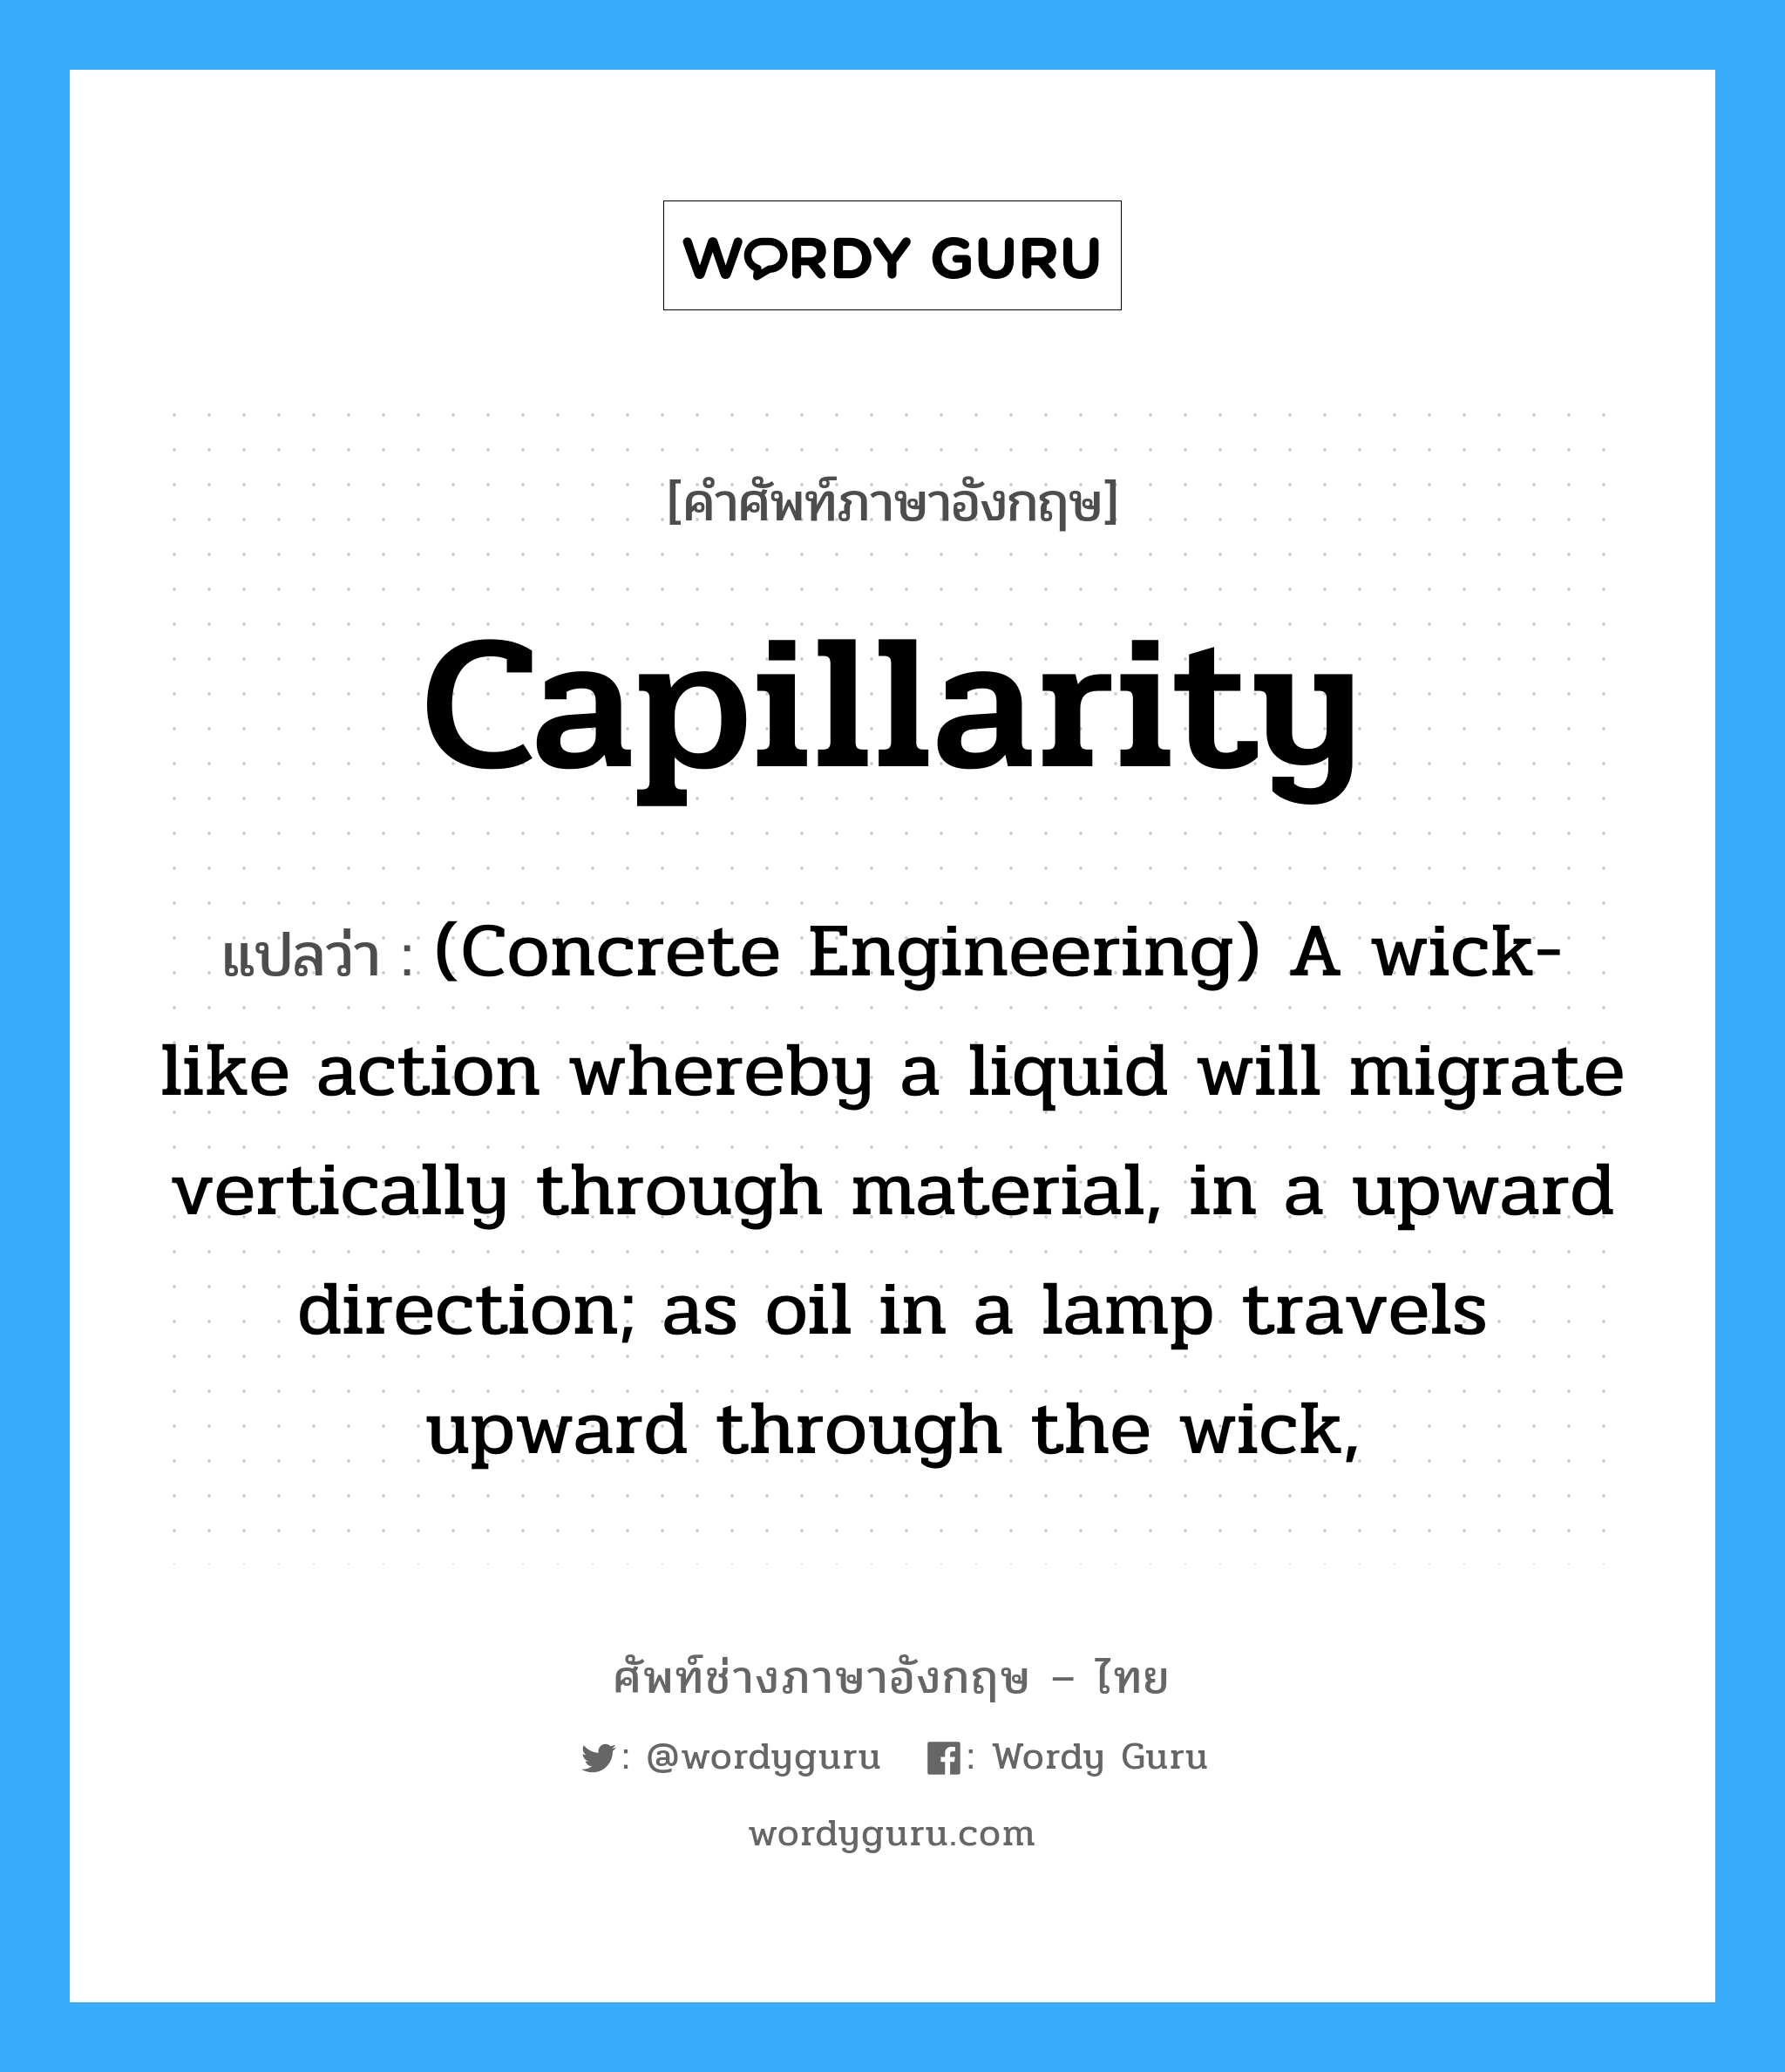 (Concrete Engineering) A wick-like action whereby a liquid will migrate vertically through material, in a upward direction; as oil in a lamp travels upward through the wick, ภาษาอังกฤษ?, คำศัพท์ช่างภาษาอังกฤษ - ไทย (Concrete Engineering) A wick-like action whereby a liquid will migrate vertically through material, in a upward direction; as oil in a lamp travels upward through the wick, คำศัพท์ภาษาอังกฤษ (Concrete Engineering) A wick-like action whereby a liquid will migrate vertically through material, in a upward direction; as oil in a lamp travels upward through the wick, แปลว่า Capillarity